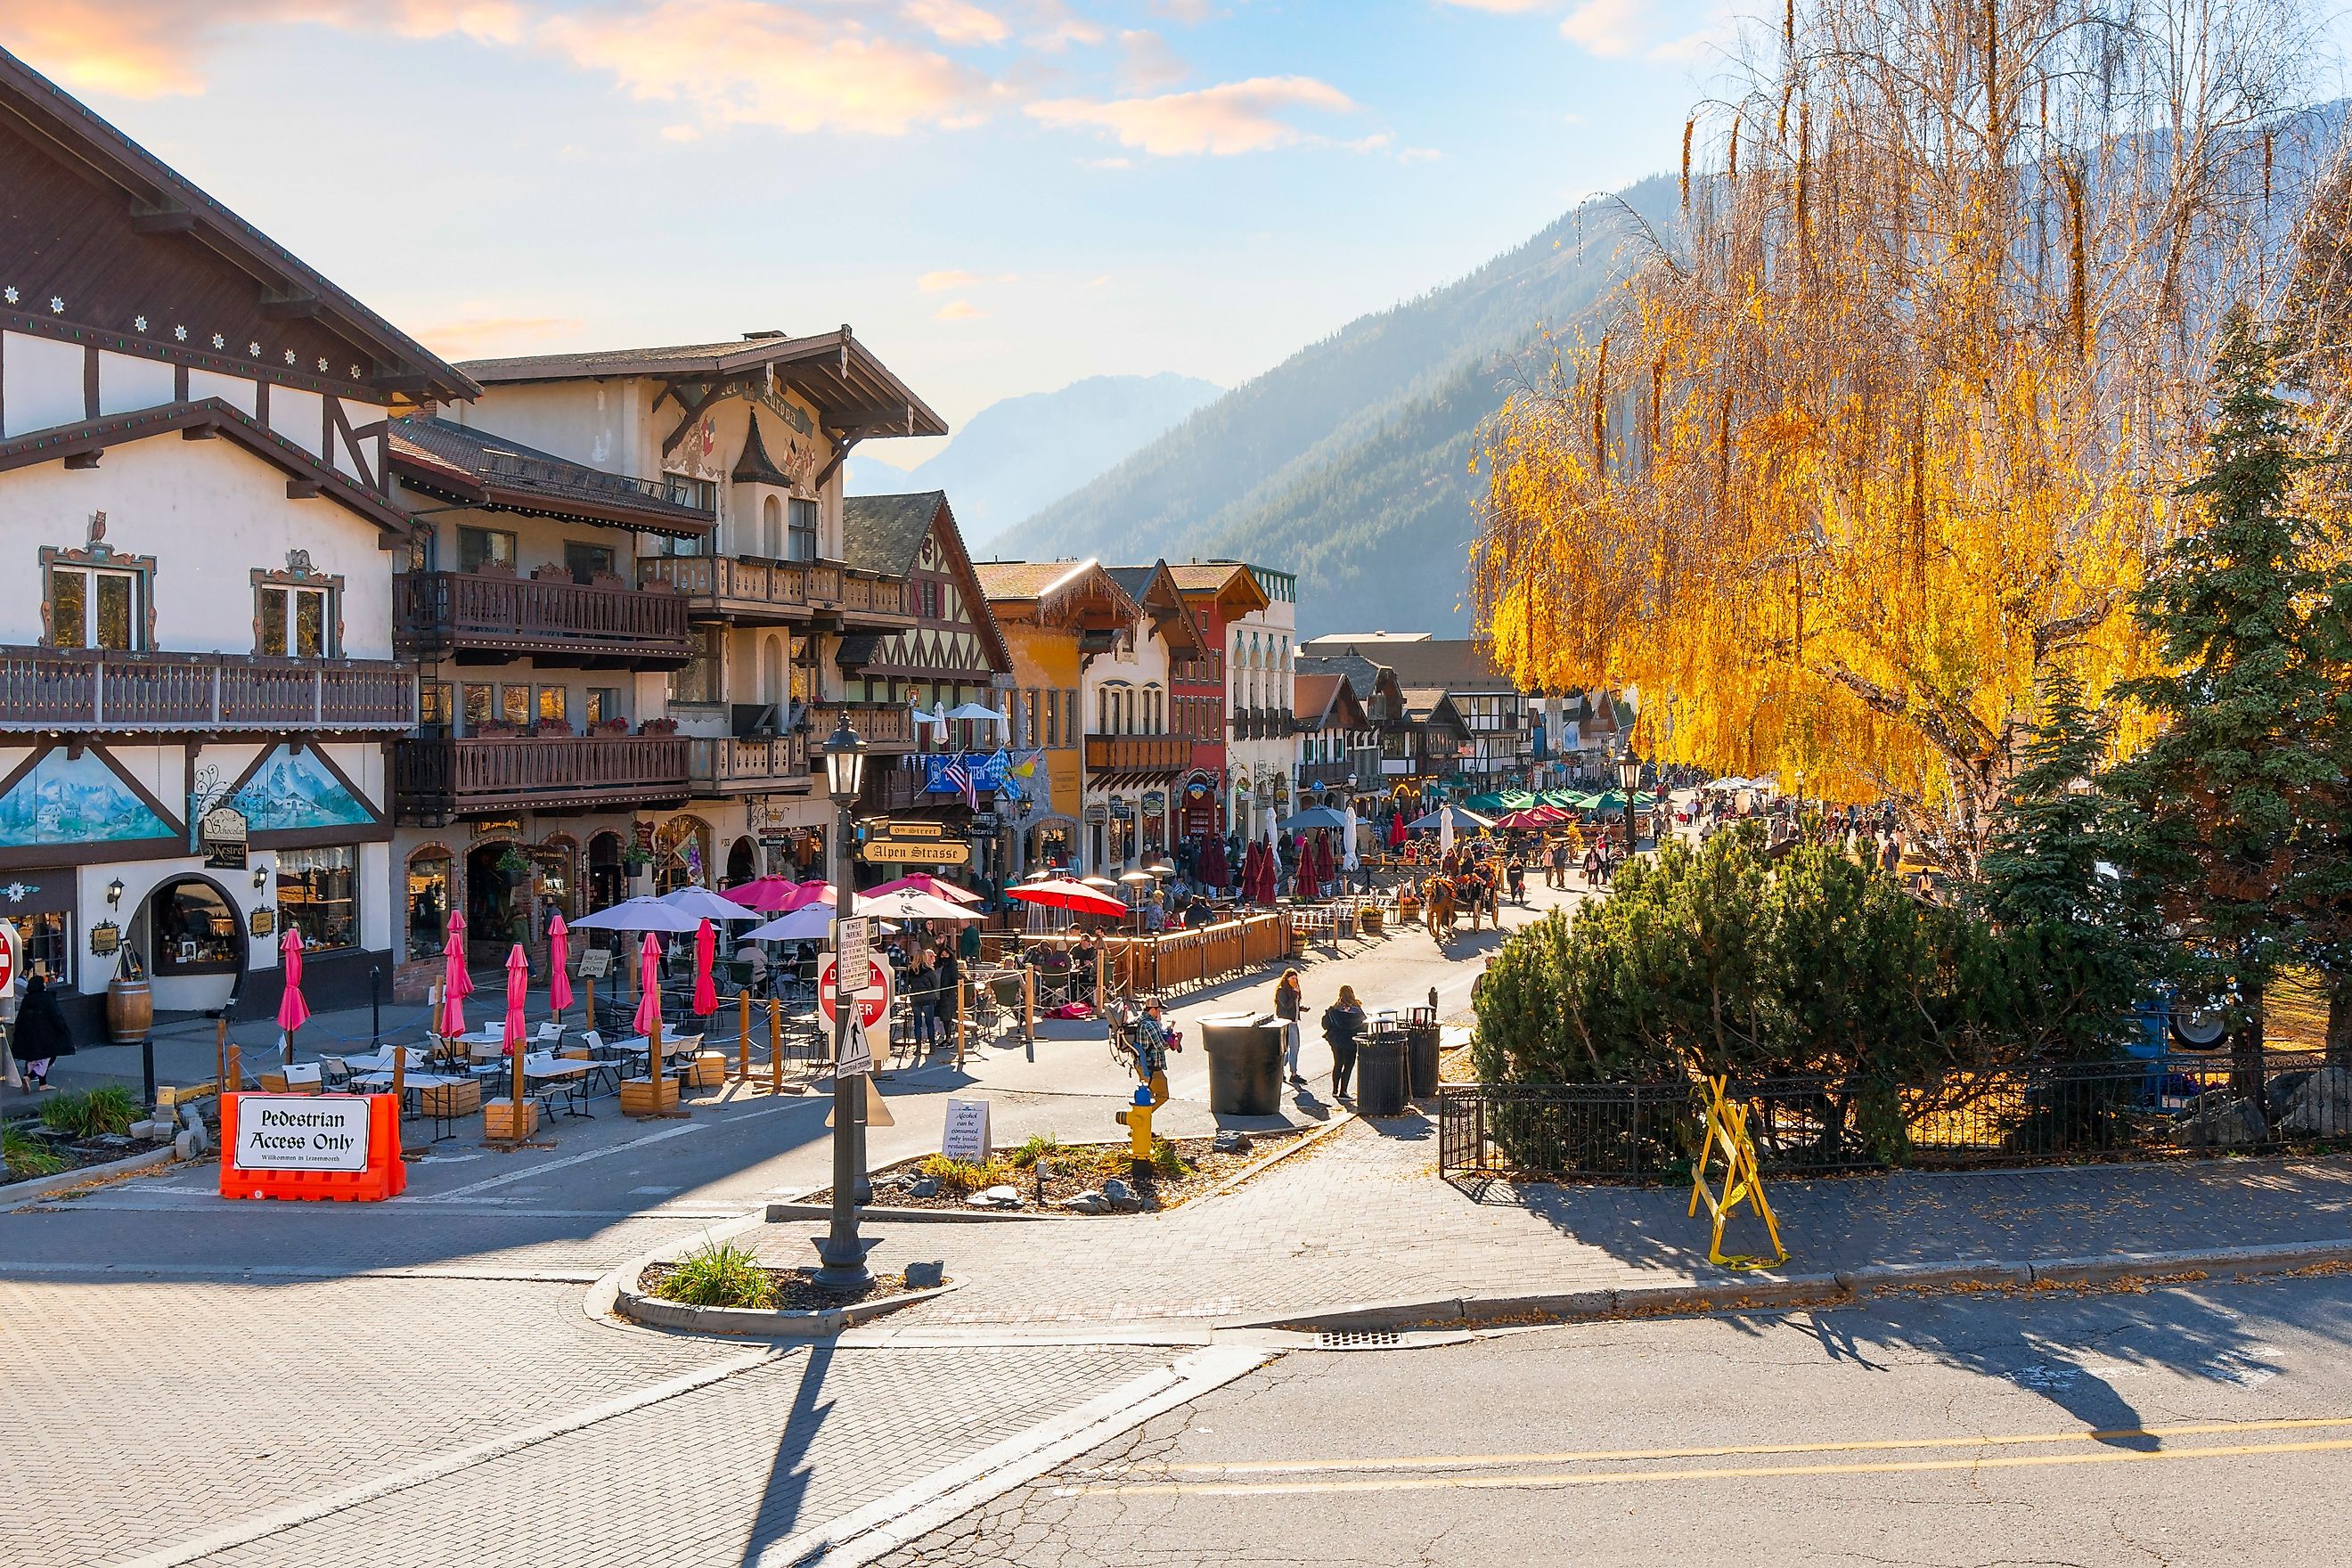 Pedestrian main street in Leavenworth, Washington, with Bavarian-themed cafes and shops. Editorial credit: Kirk Fisher / Shutterstock.com